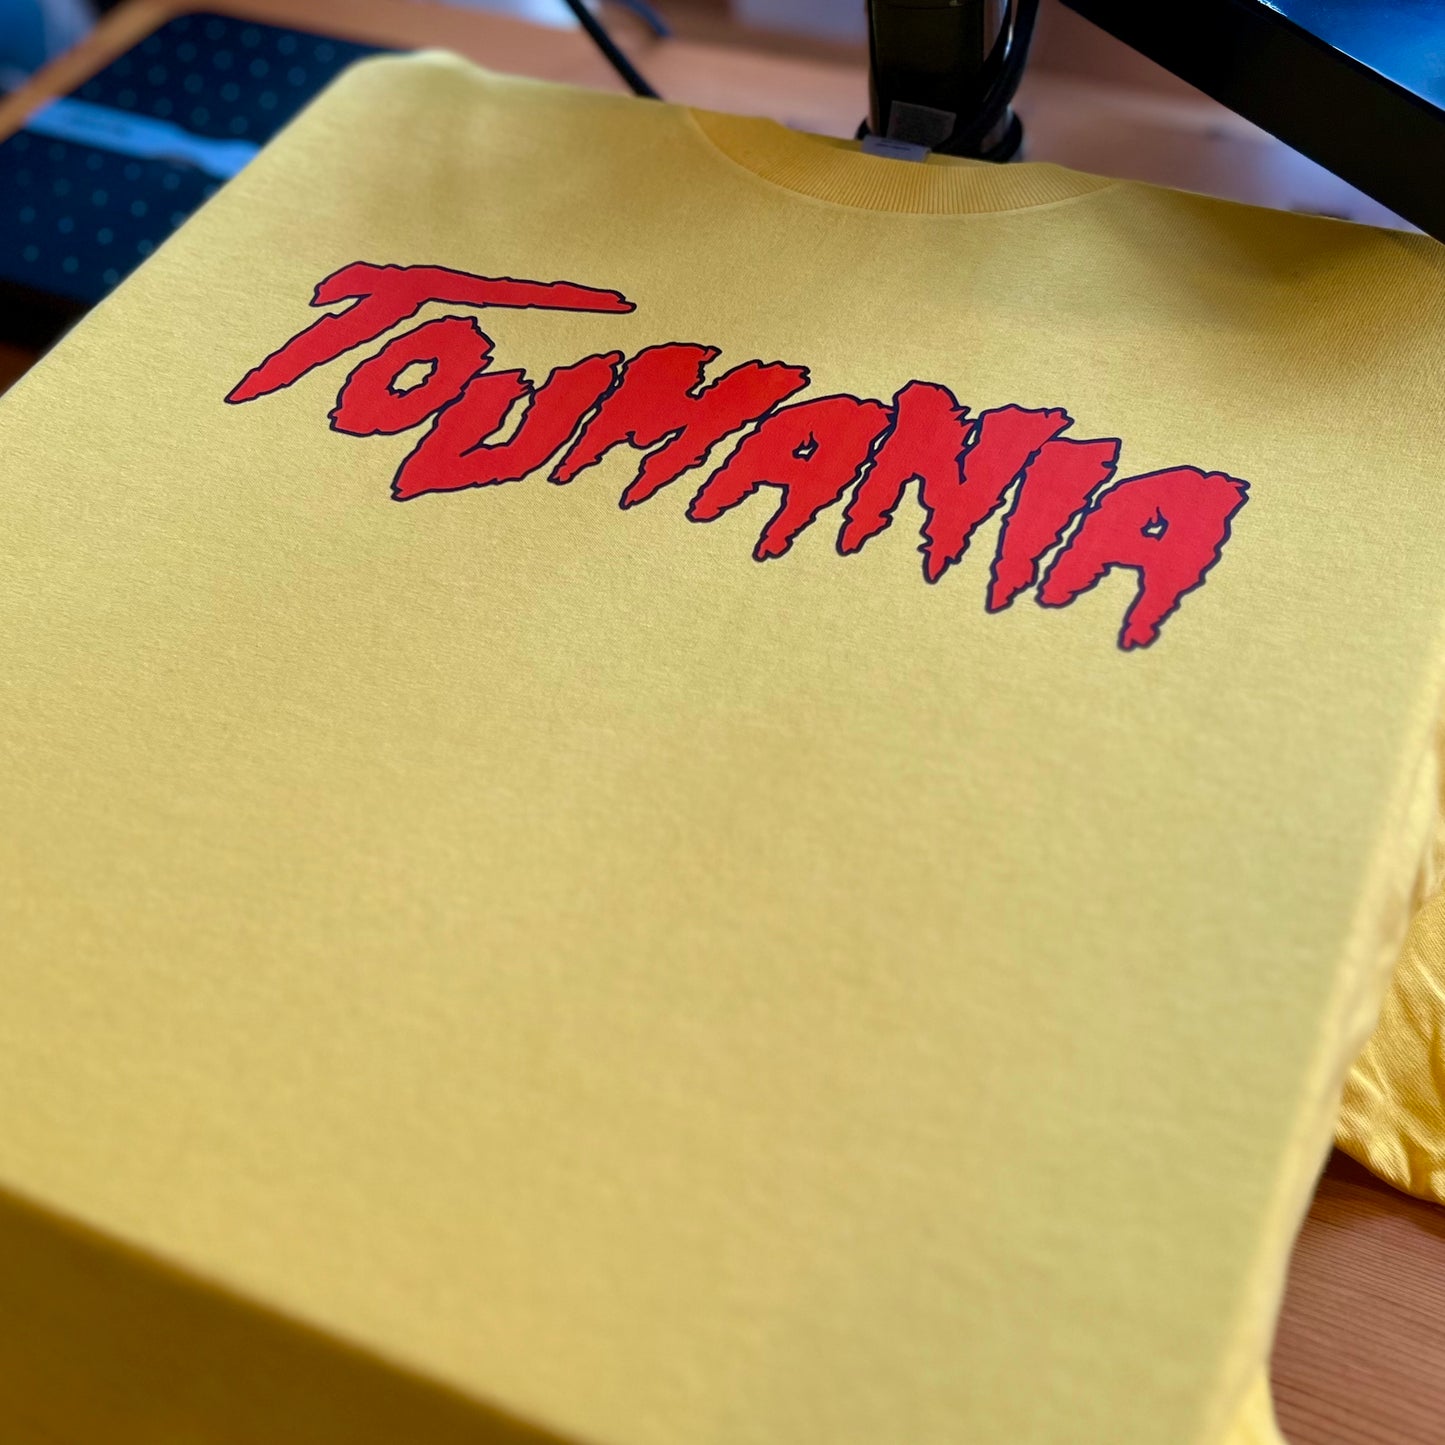 TOUMANIA T-Shirt PRE-ORDER (SHIPS IN 2-3 WEEKS)